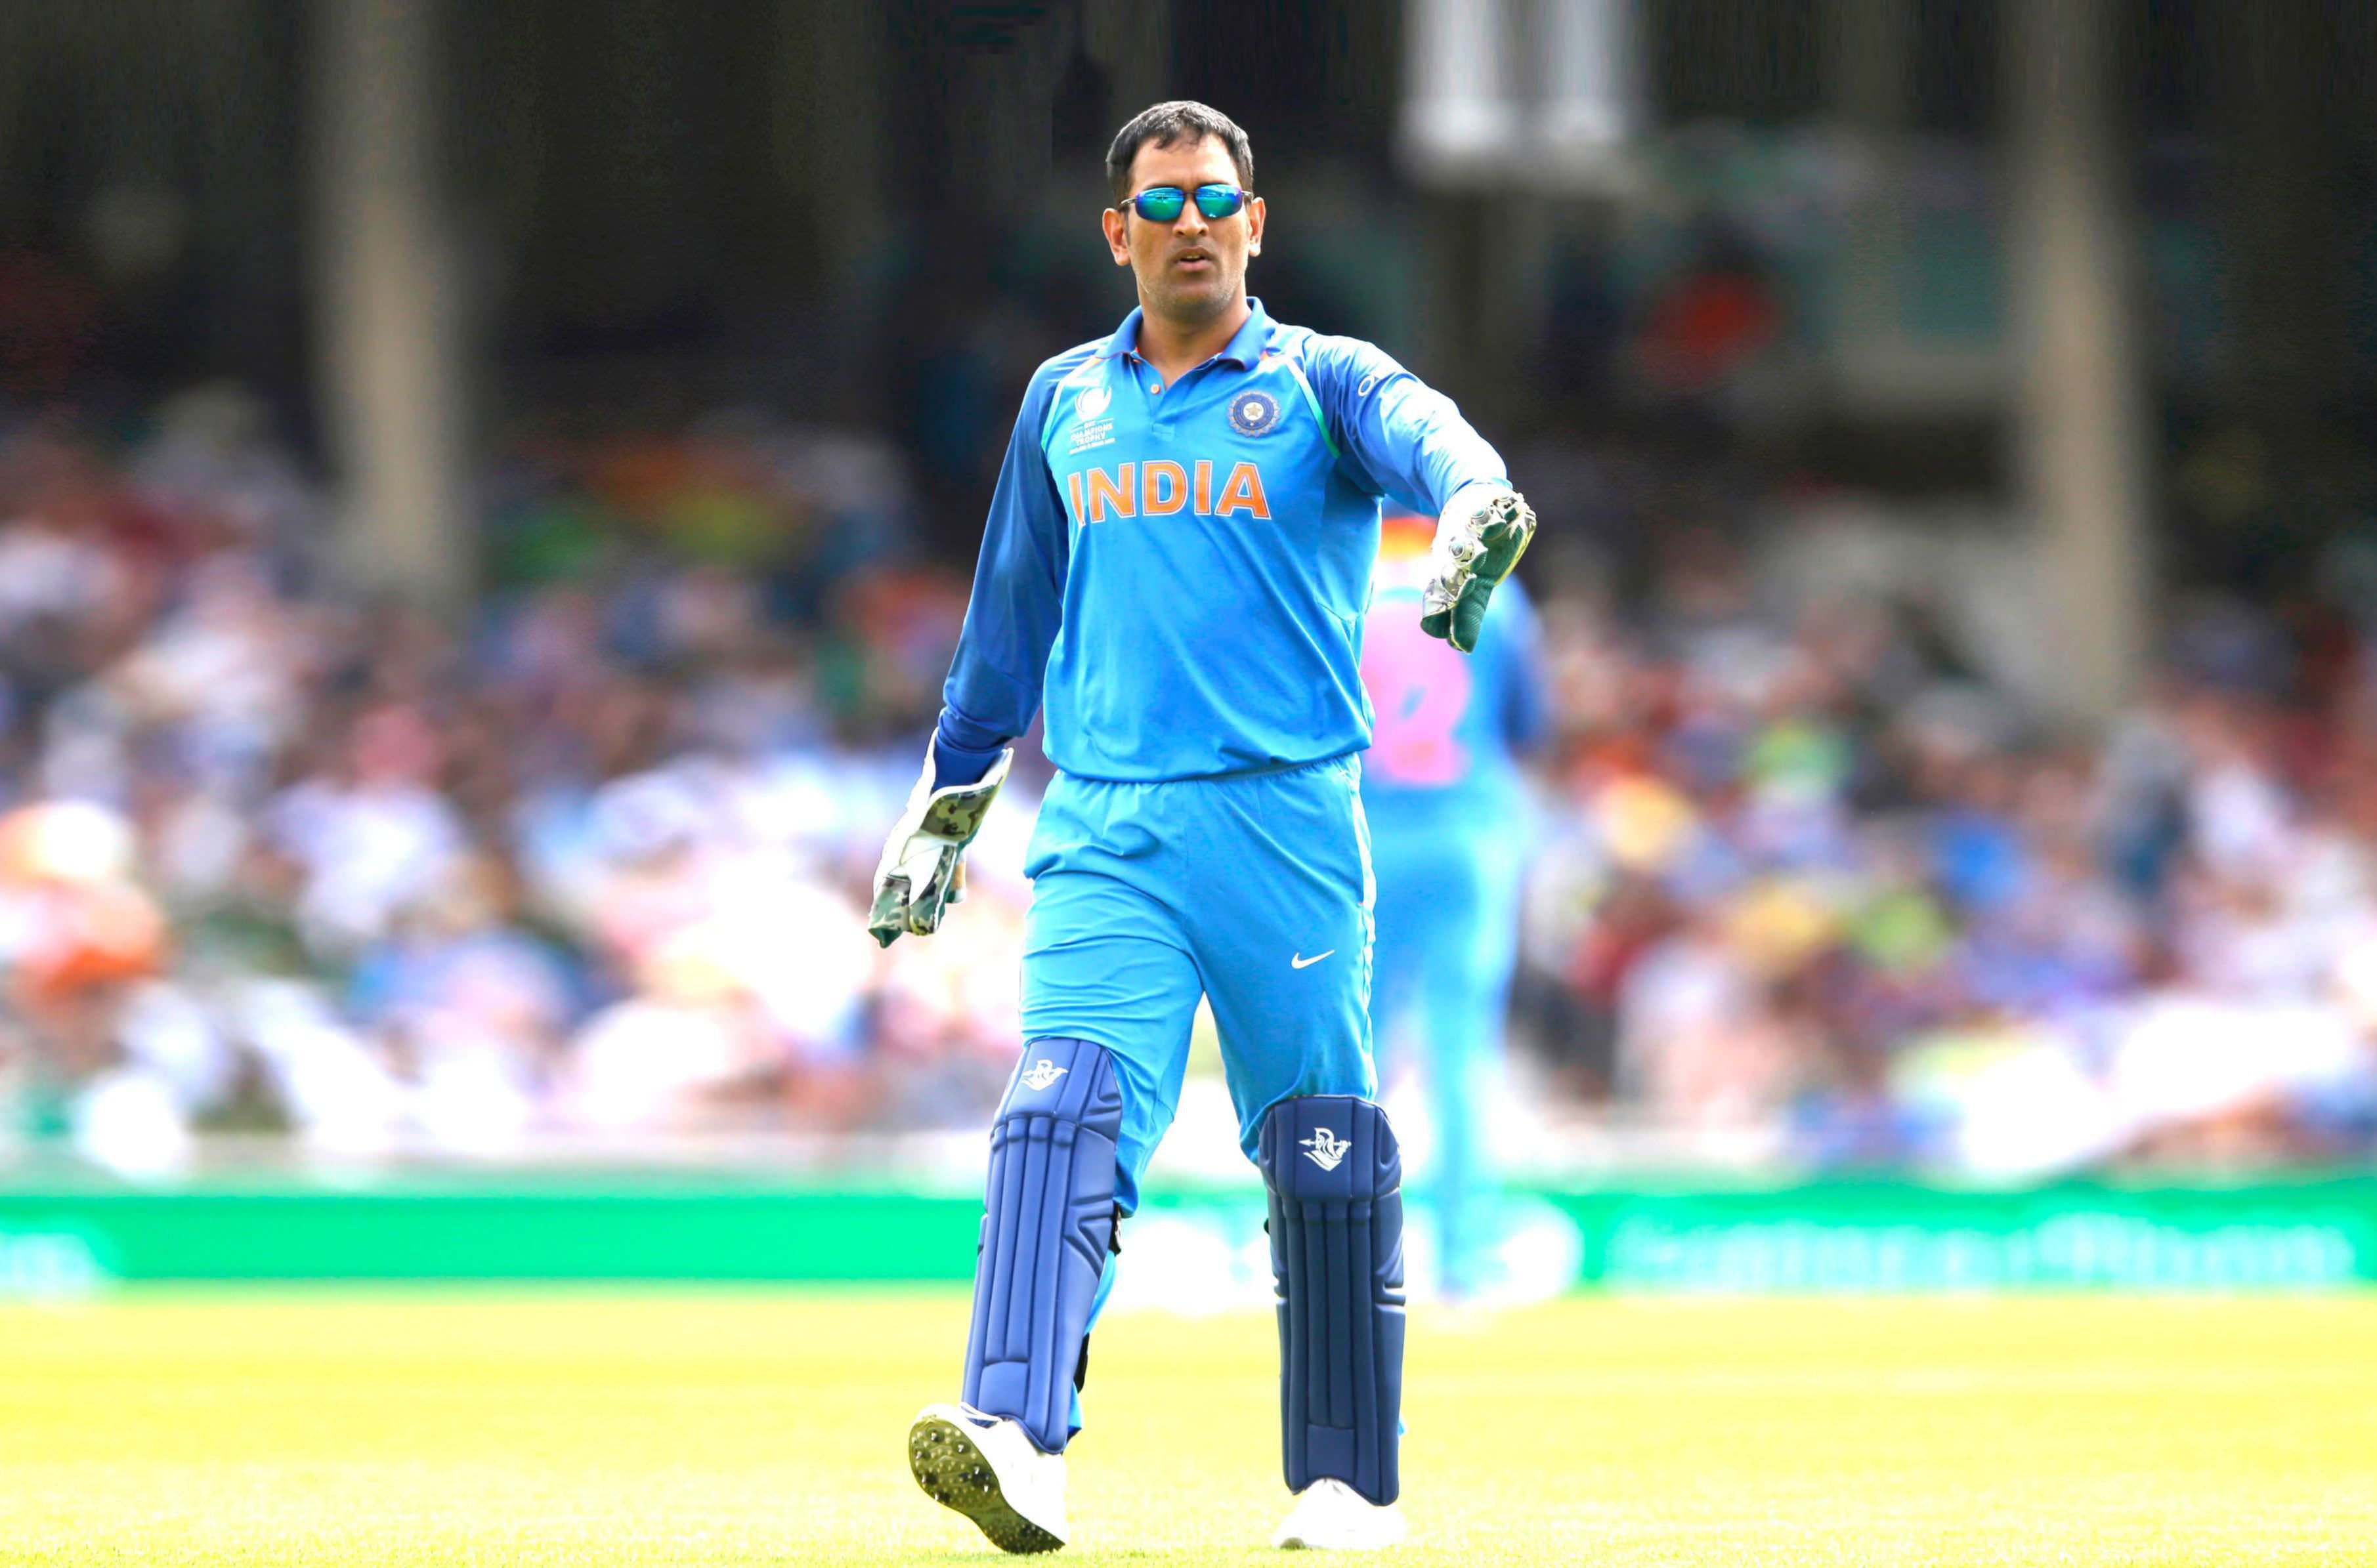 5 Times MS Dhoni Inspired Us To Stay Cool During Stressful